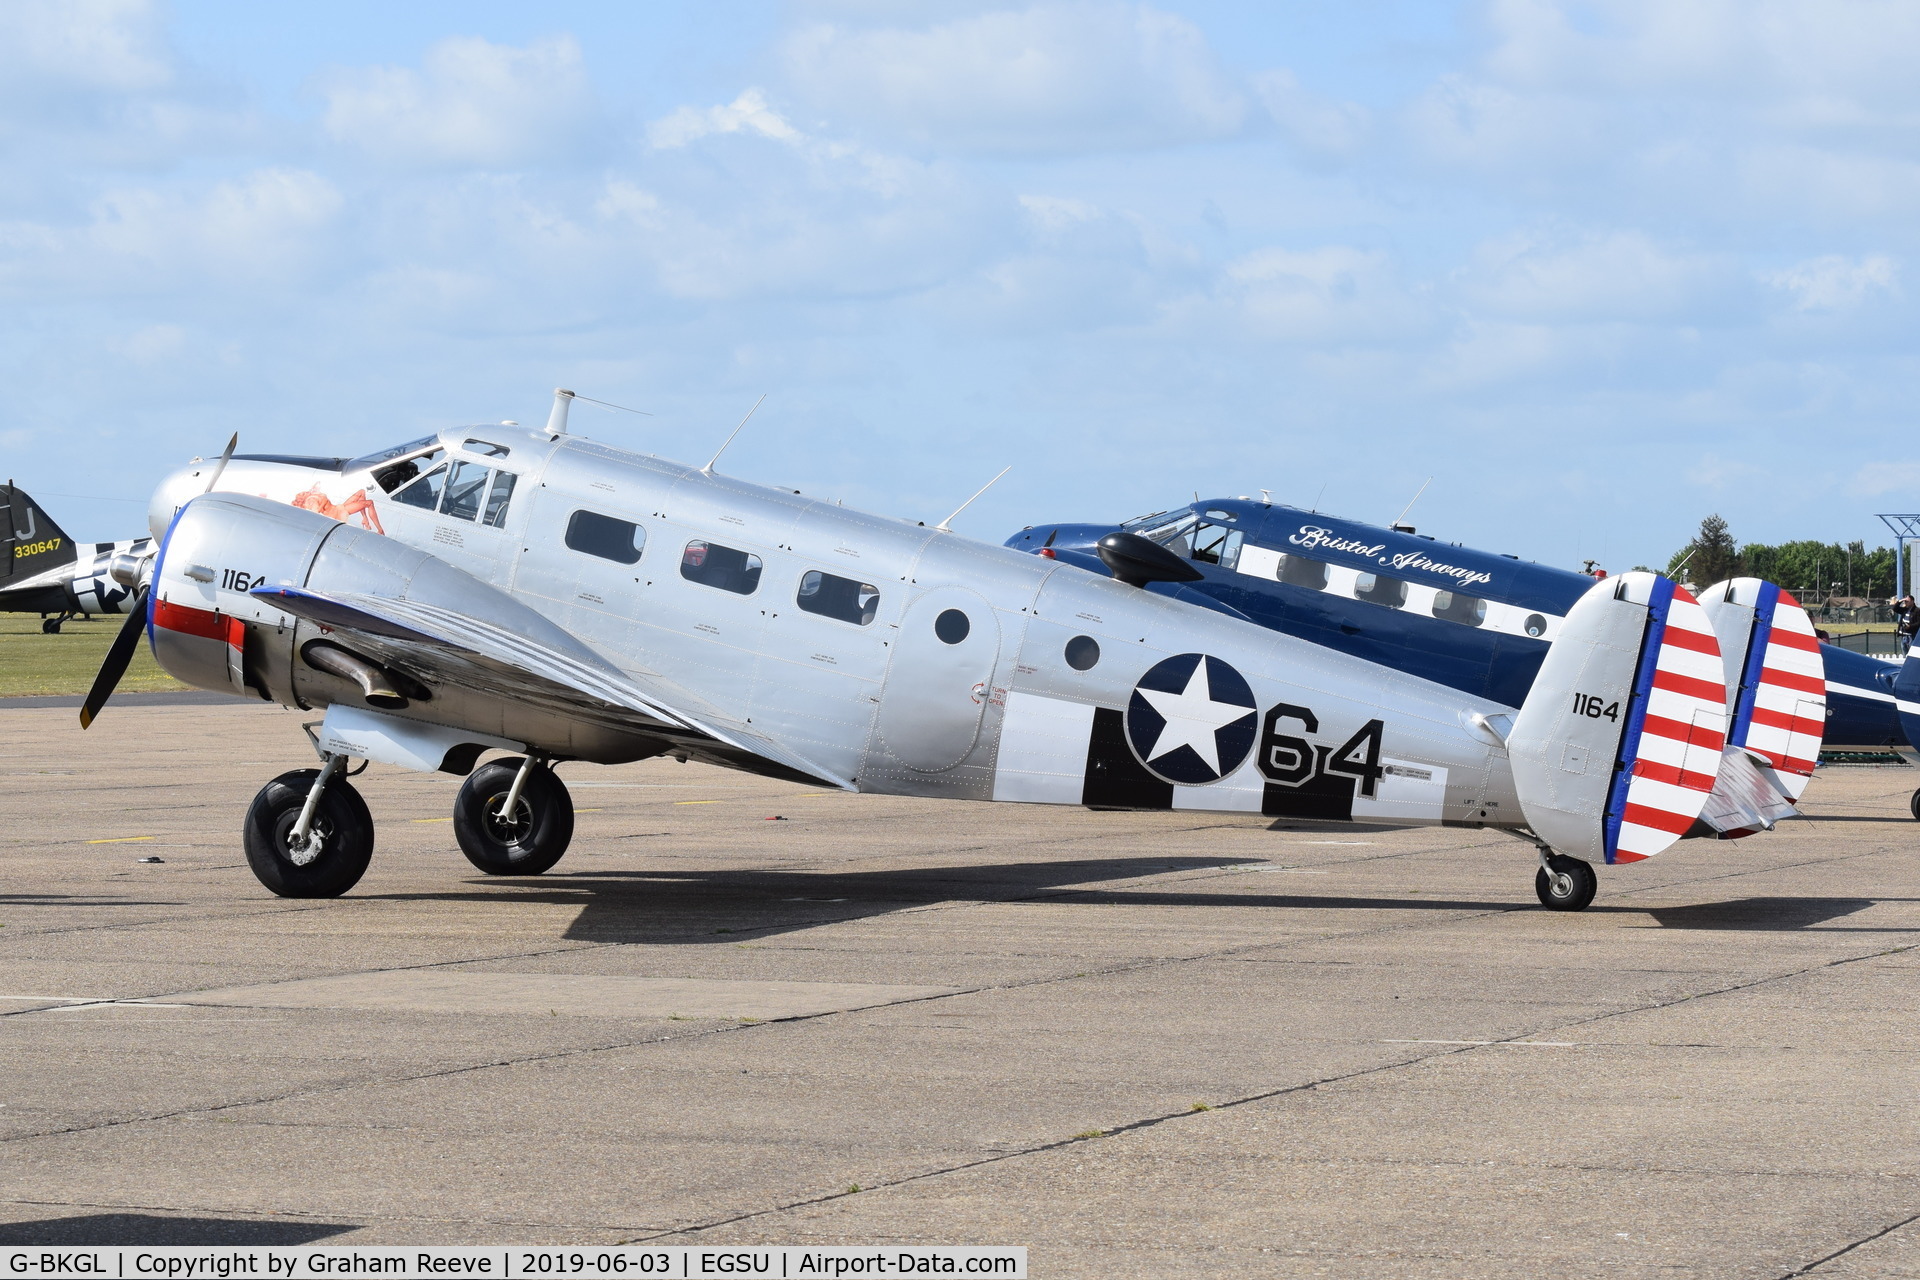 G-BKGL, 1952 Beech Expeditor 3TM C/N CA-164 (A-764), Parked at Duxford.